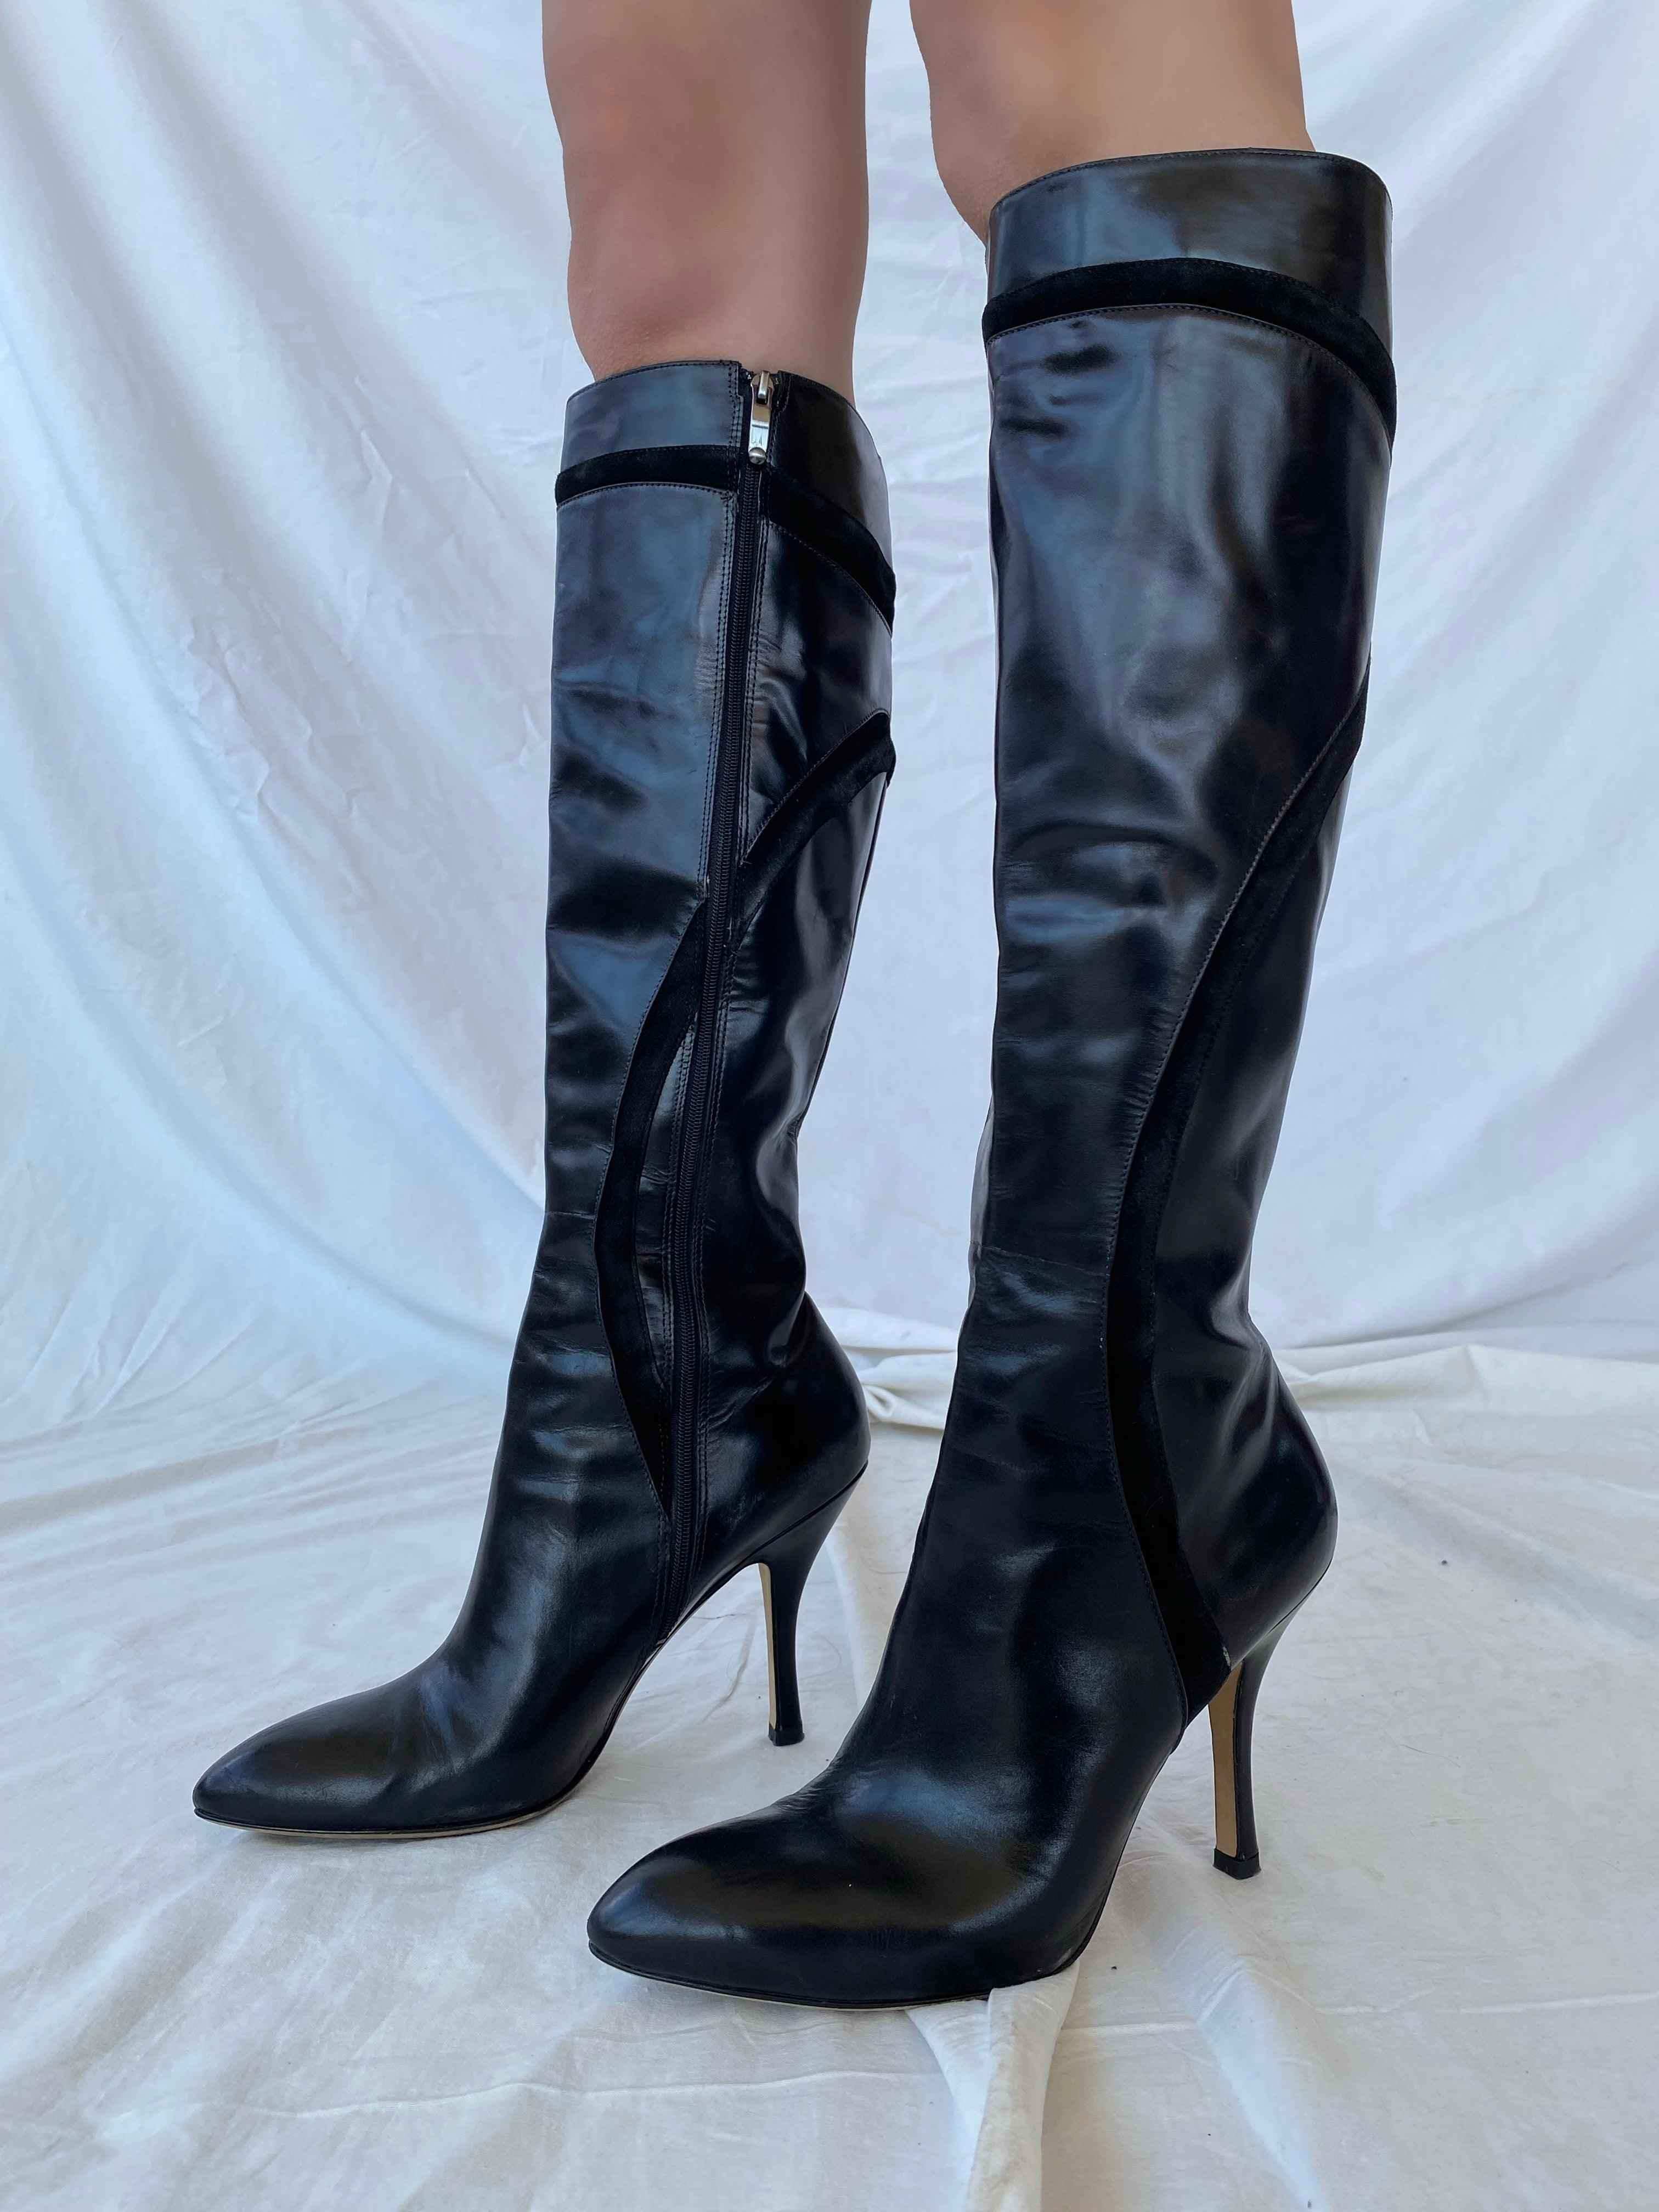 VIA SPIGA Leather Boots - Balagan Vintage Boots 00s, 90s, leather